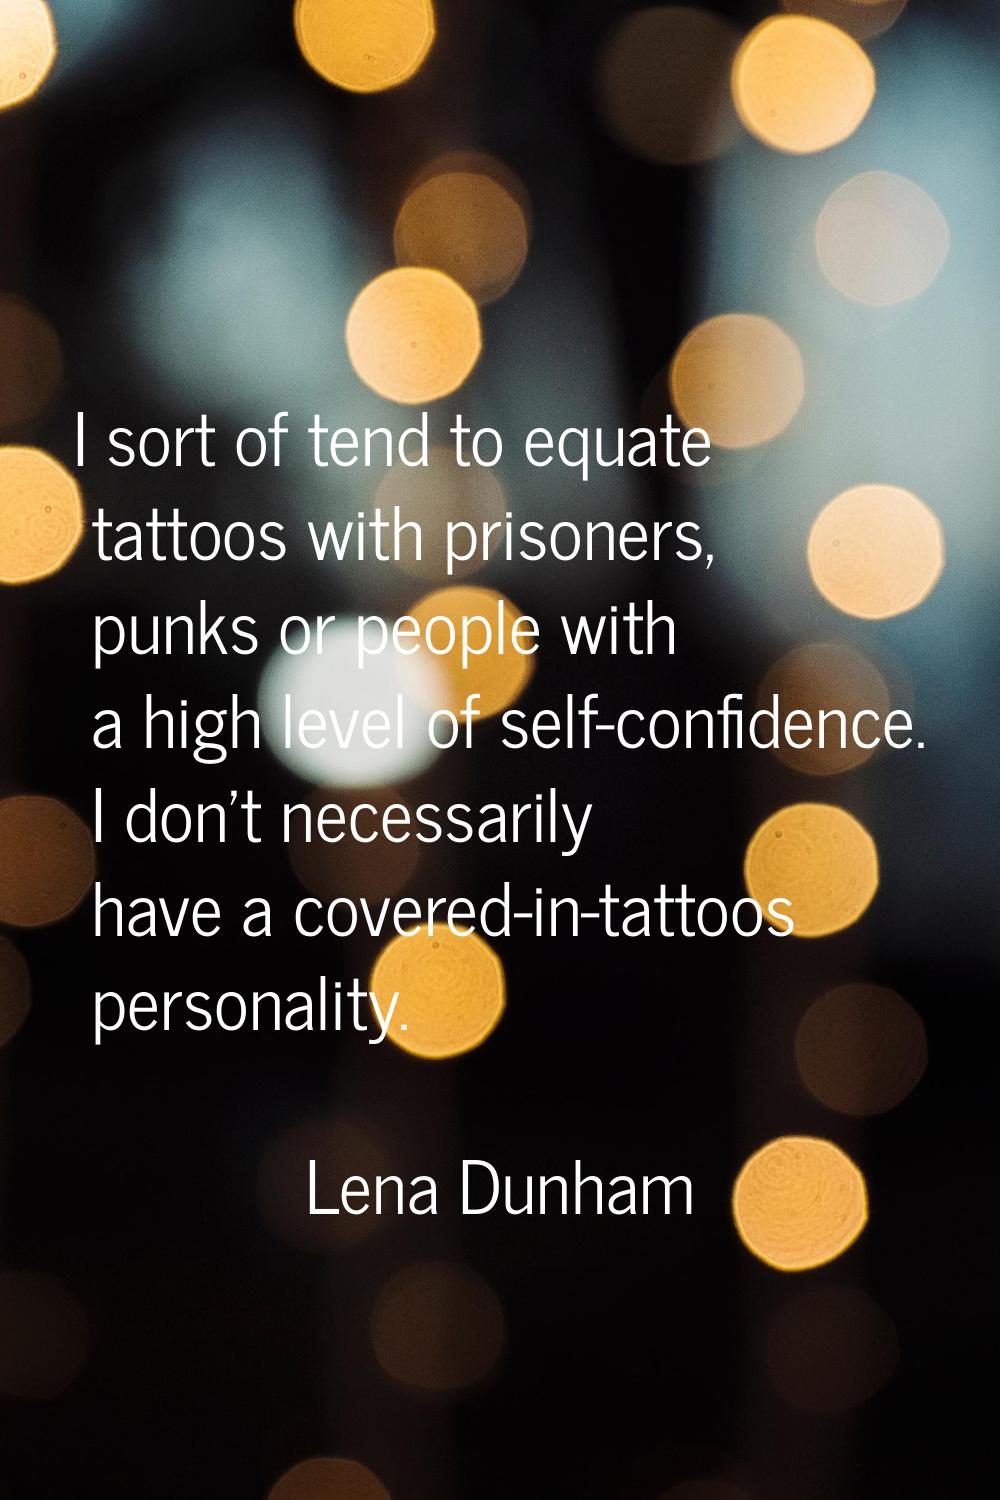 I sort of tend to equate tattoos with prisoners, punks or people with a high level of self-confiden